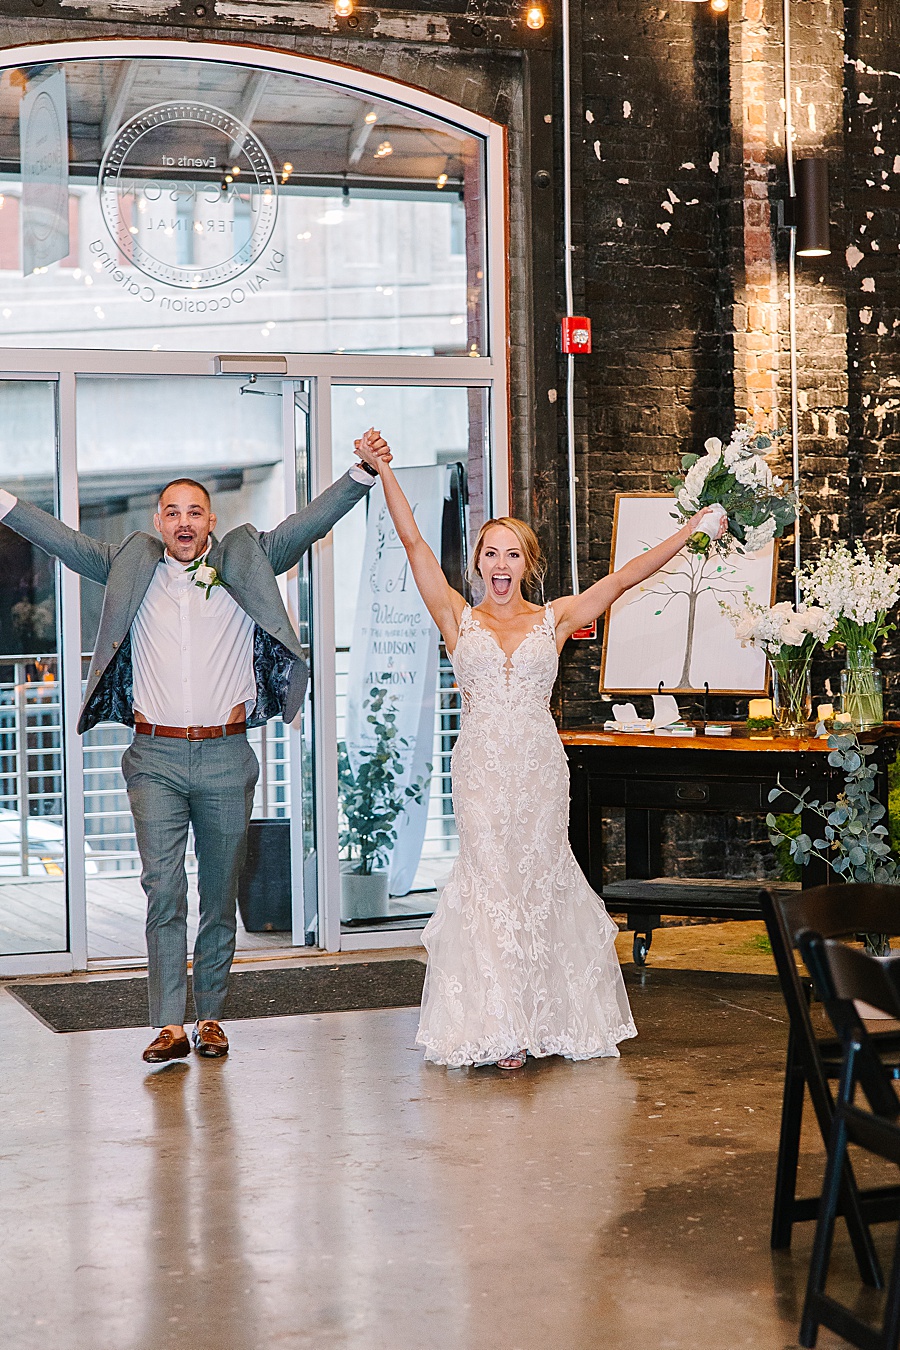 Bride and groom entering reception at Jackson Terminal events wedding in Knoxville TN by Mandy Hart Photo, Knoxville TN Wedding Photographer